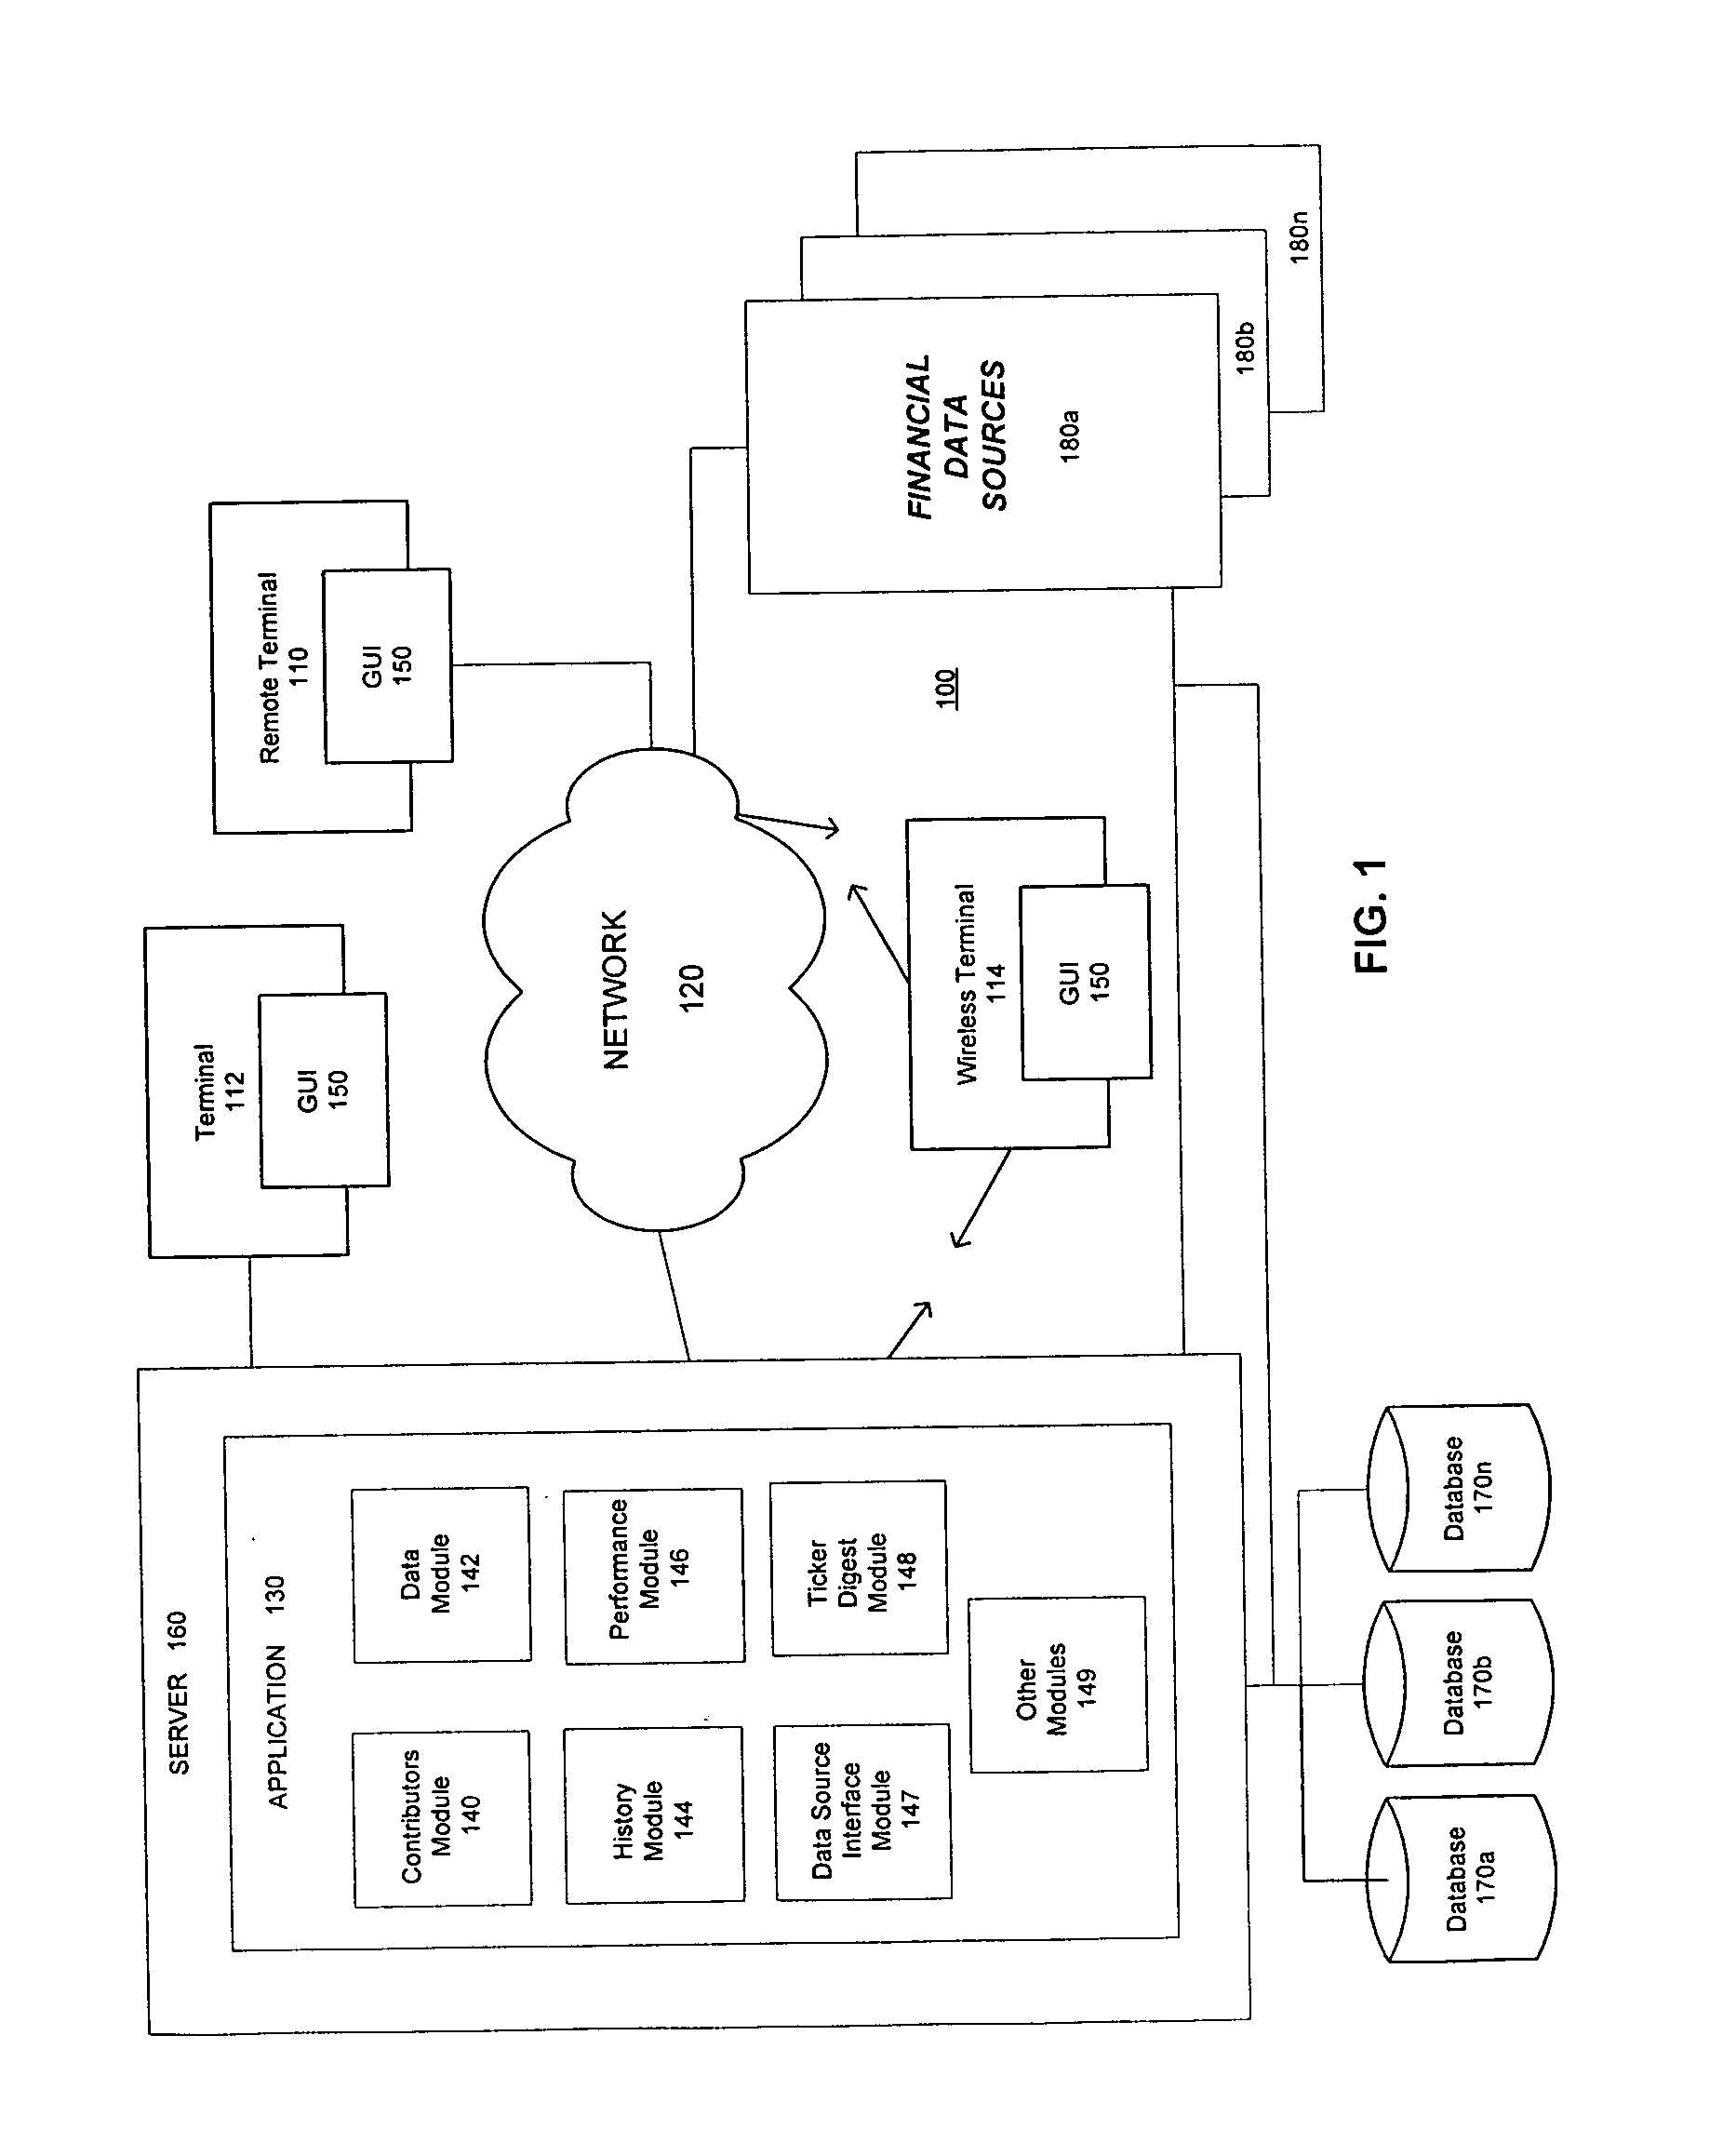 System and method for facilitating the selection of security analyst research reports